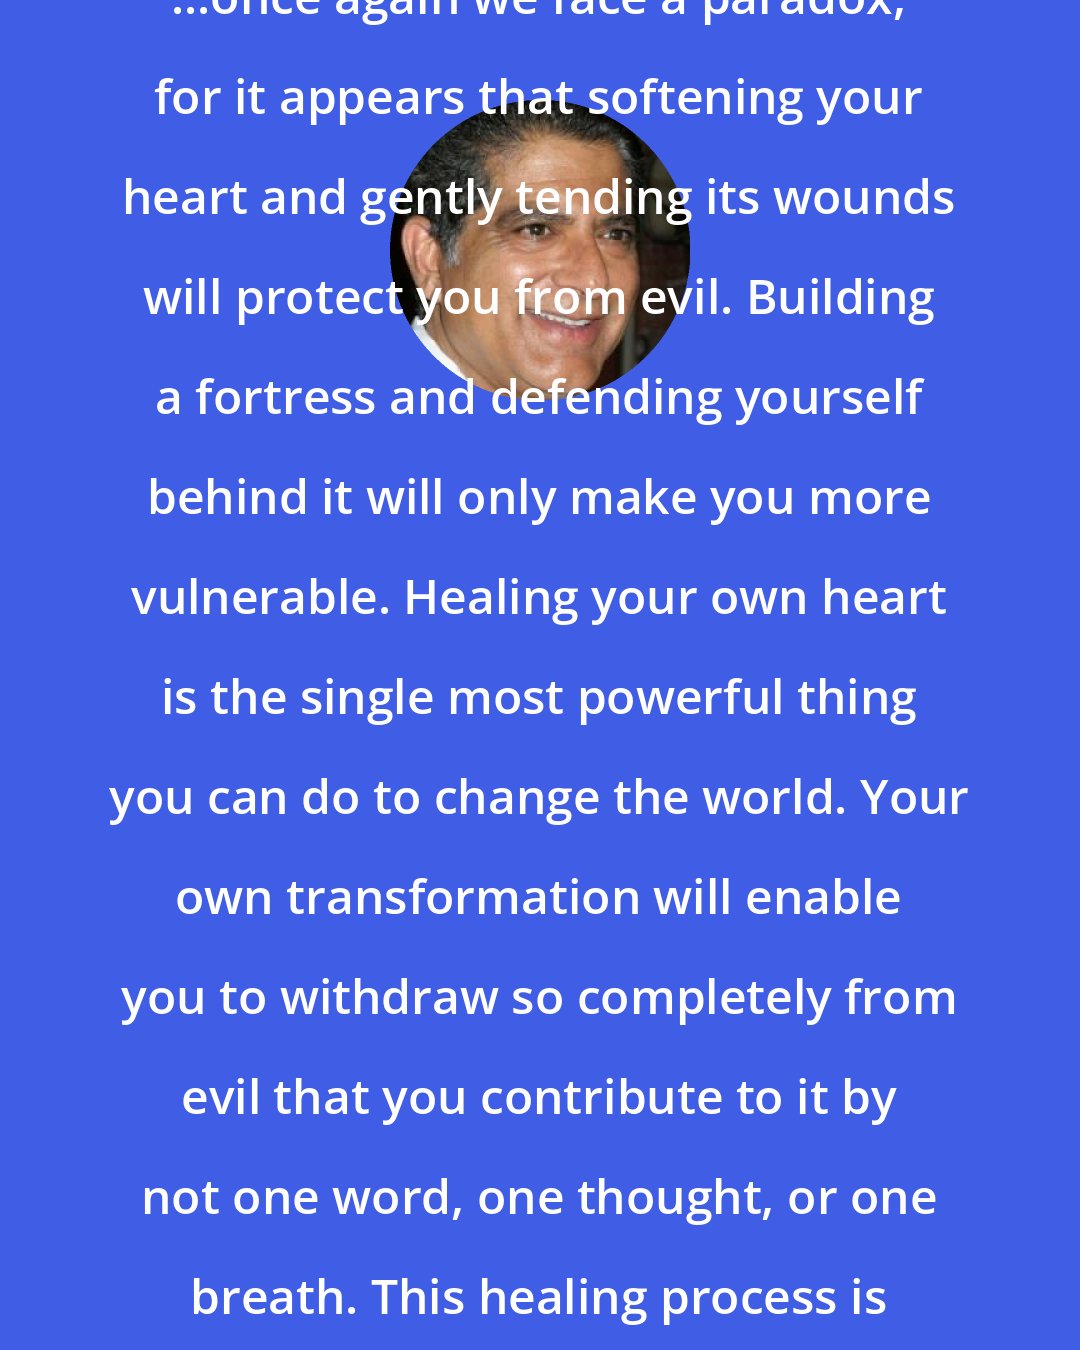 Deepak Chopra: ...once again we face a paradox, for it appears that softening your heart and gently tending its wounds will protect you from evil. Building a fortress and defending yourself behind it will only make you more vulnerable. Healing your own heart is the single most powerful thing you can do to change the world. Your own transformation will enable you to withdraw so completely from evil that you contribute to it by not one word, one thought, or one breath. This healing process is like recovering your soul.